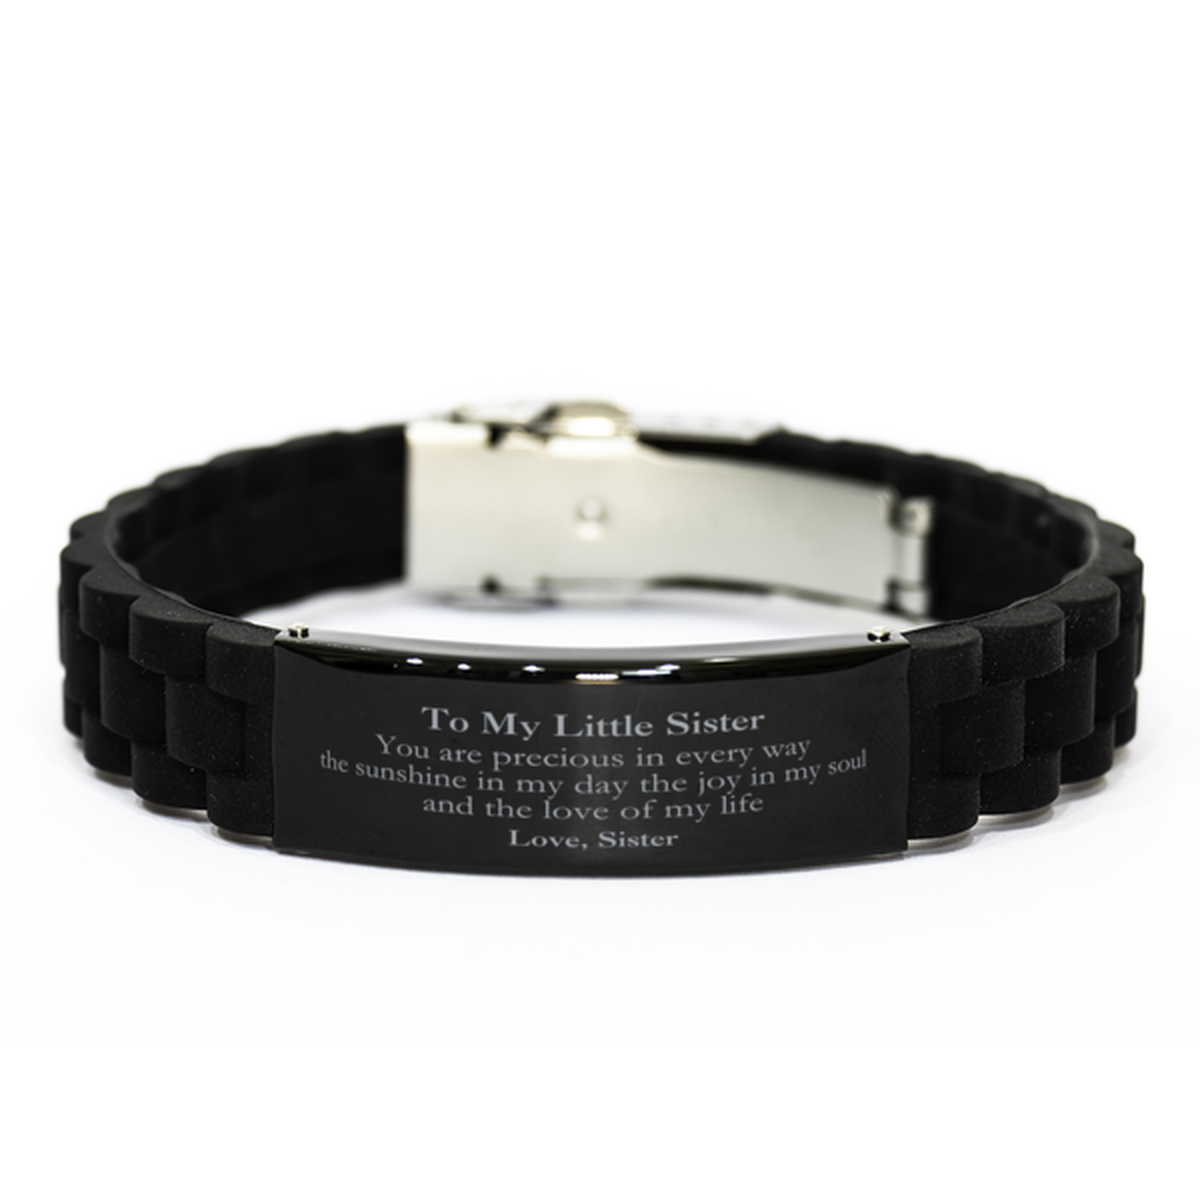 Graduation Gifts for Little Sister Black Glidelock Clasp Bracelet Present from Sister, Christmas Little Sister Birthday Gifts Little Sister You are precious in every way the sunshine in my day. Love, Sister